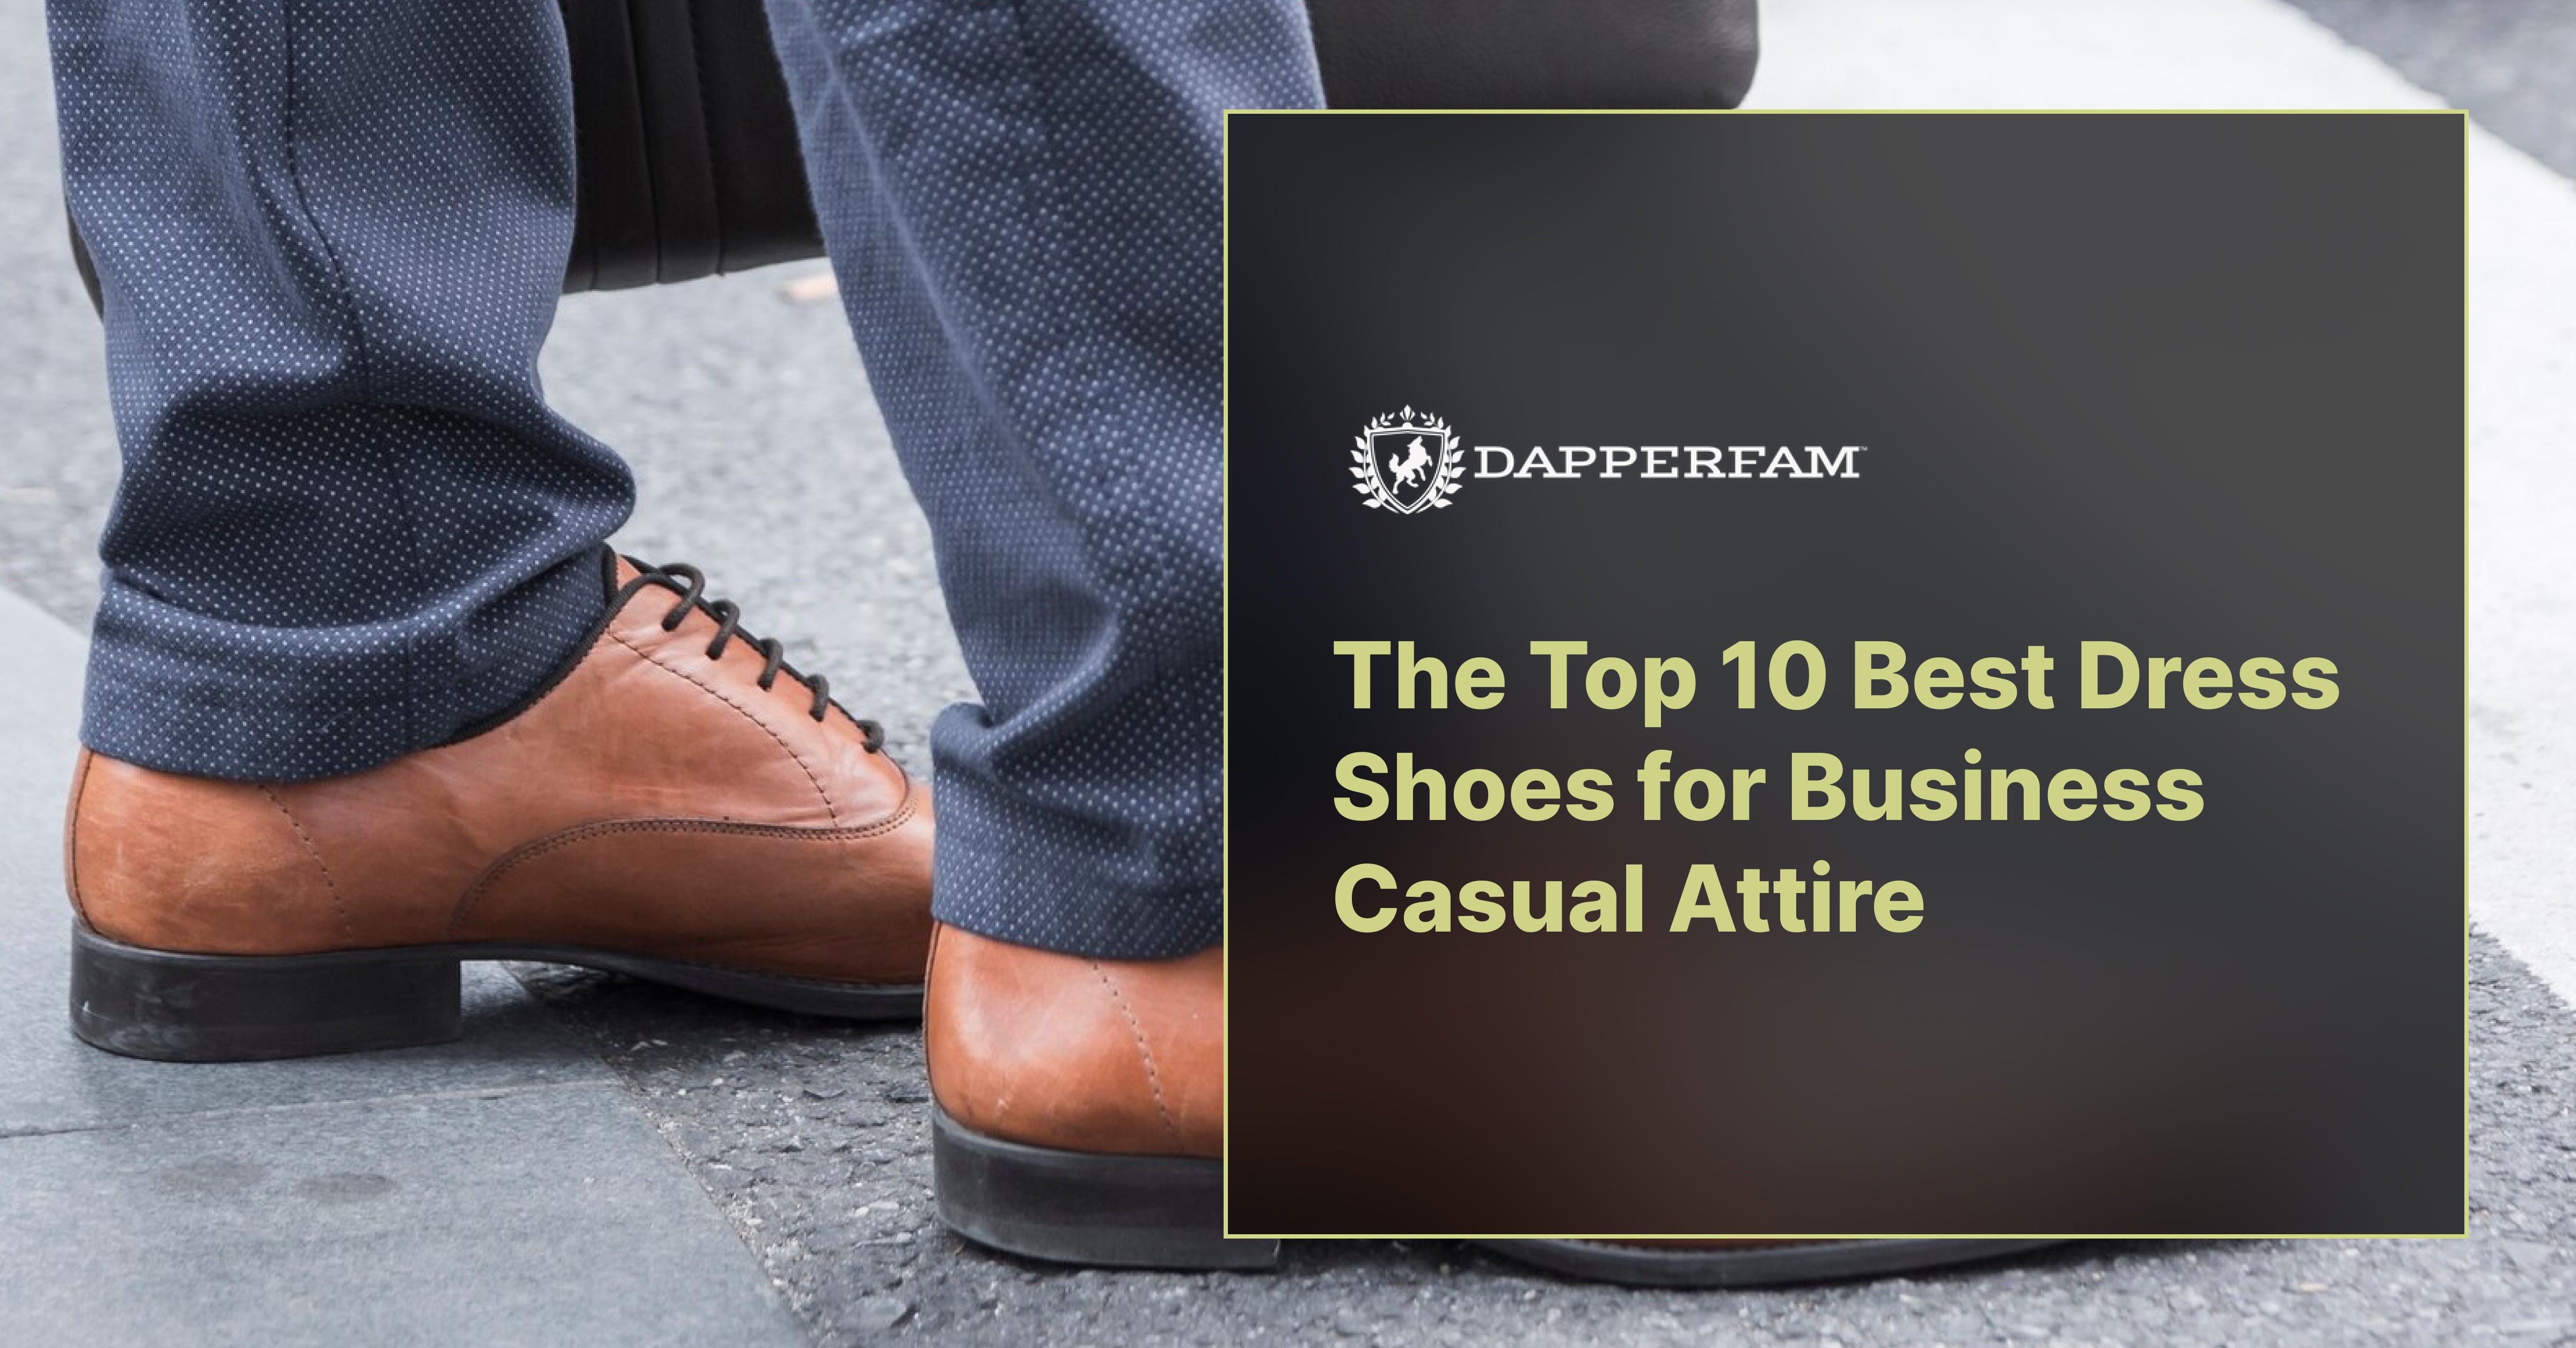 The Top 10 Best Dress Shoes for Business Casual Attire – DAPPERFAM